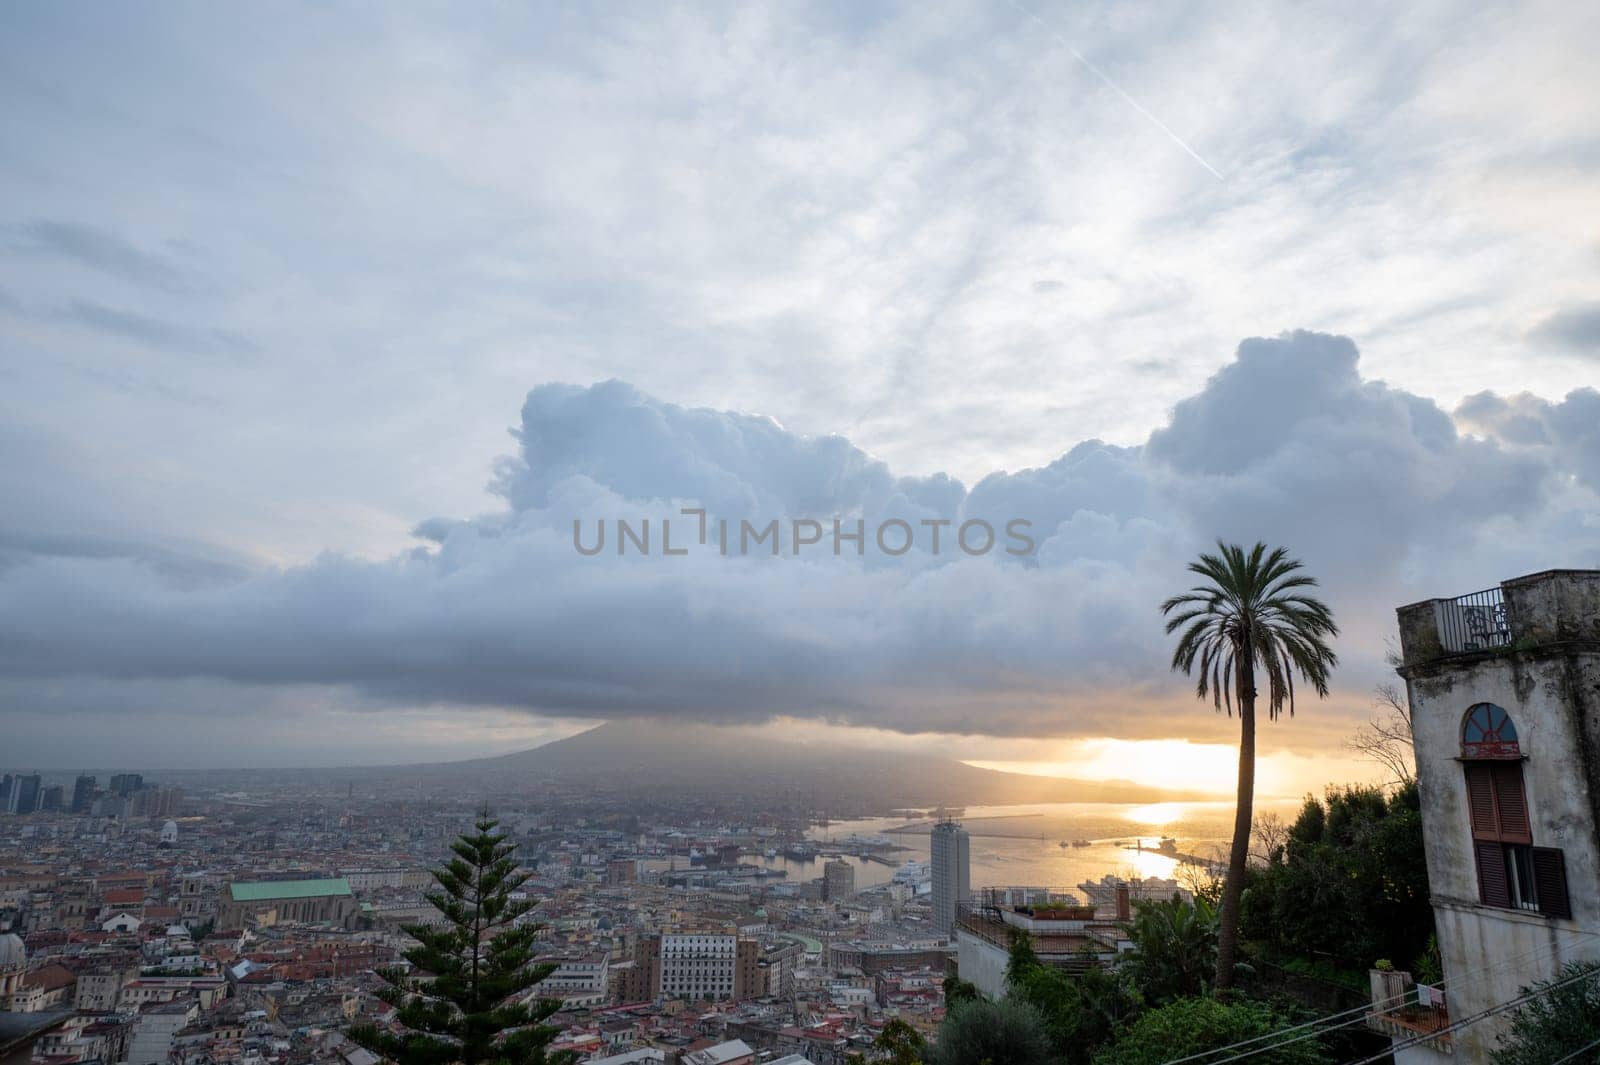 Cityscape of the city of Napoli in the morning with Vesuvius in the background by martinscphoto